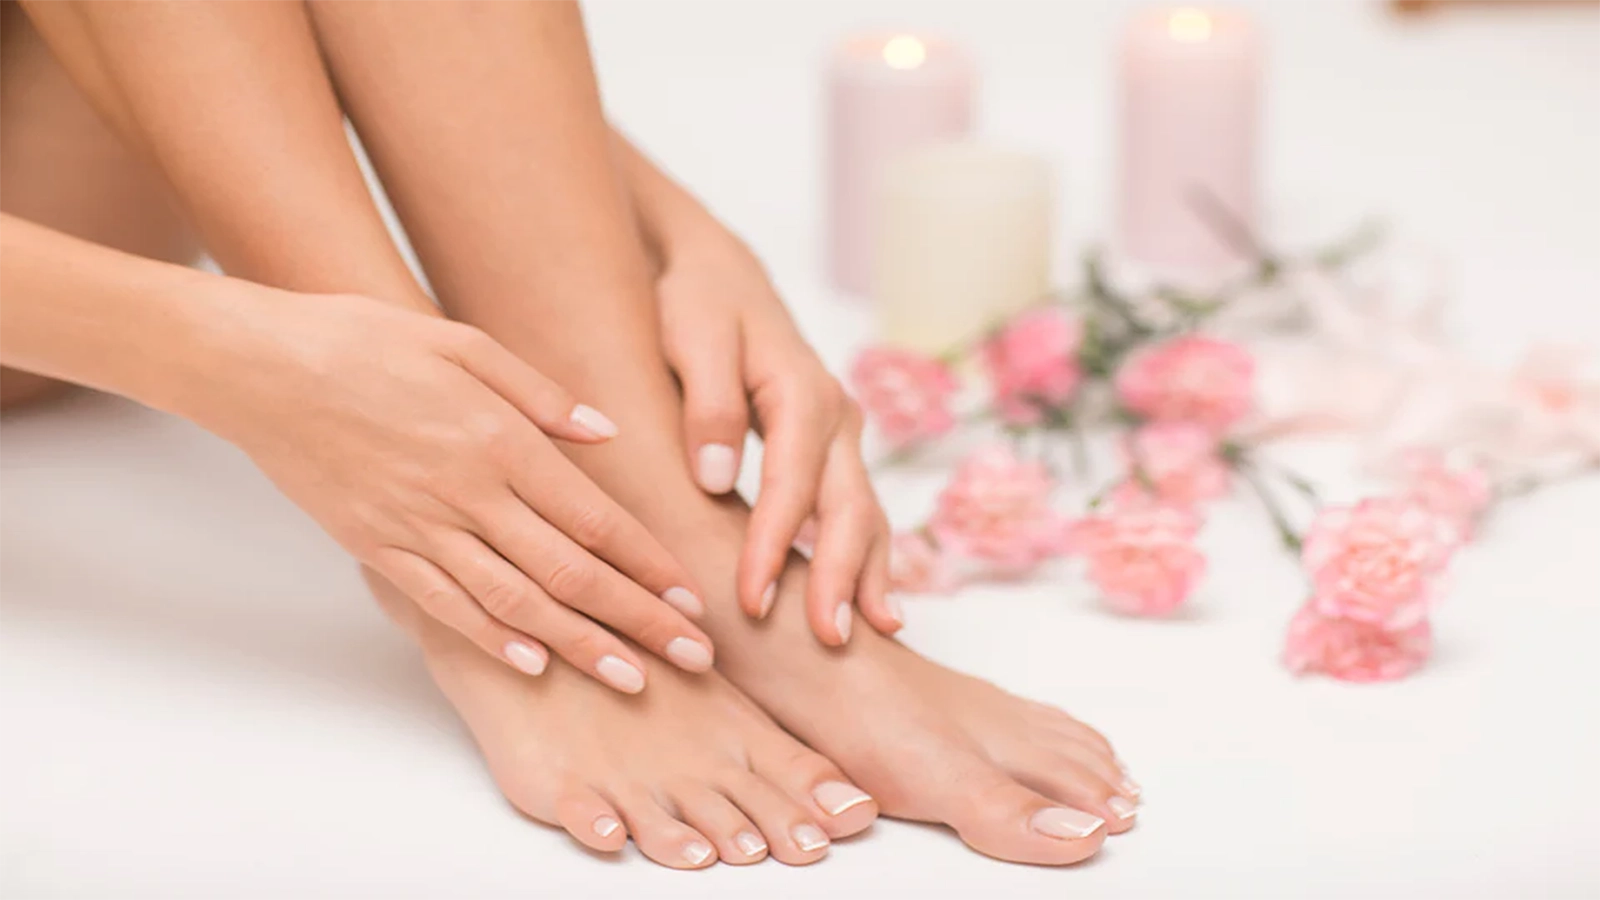 Troubled by painful cracked heels? THIS easy therapy brings relief